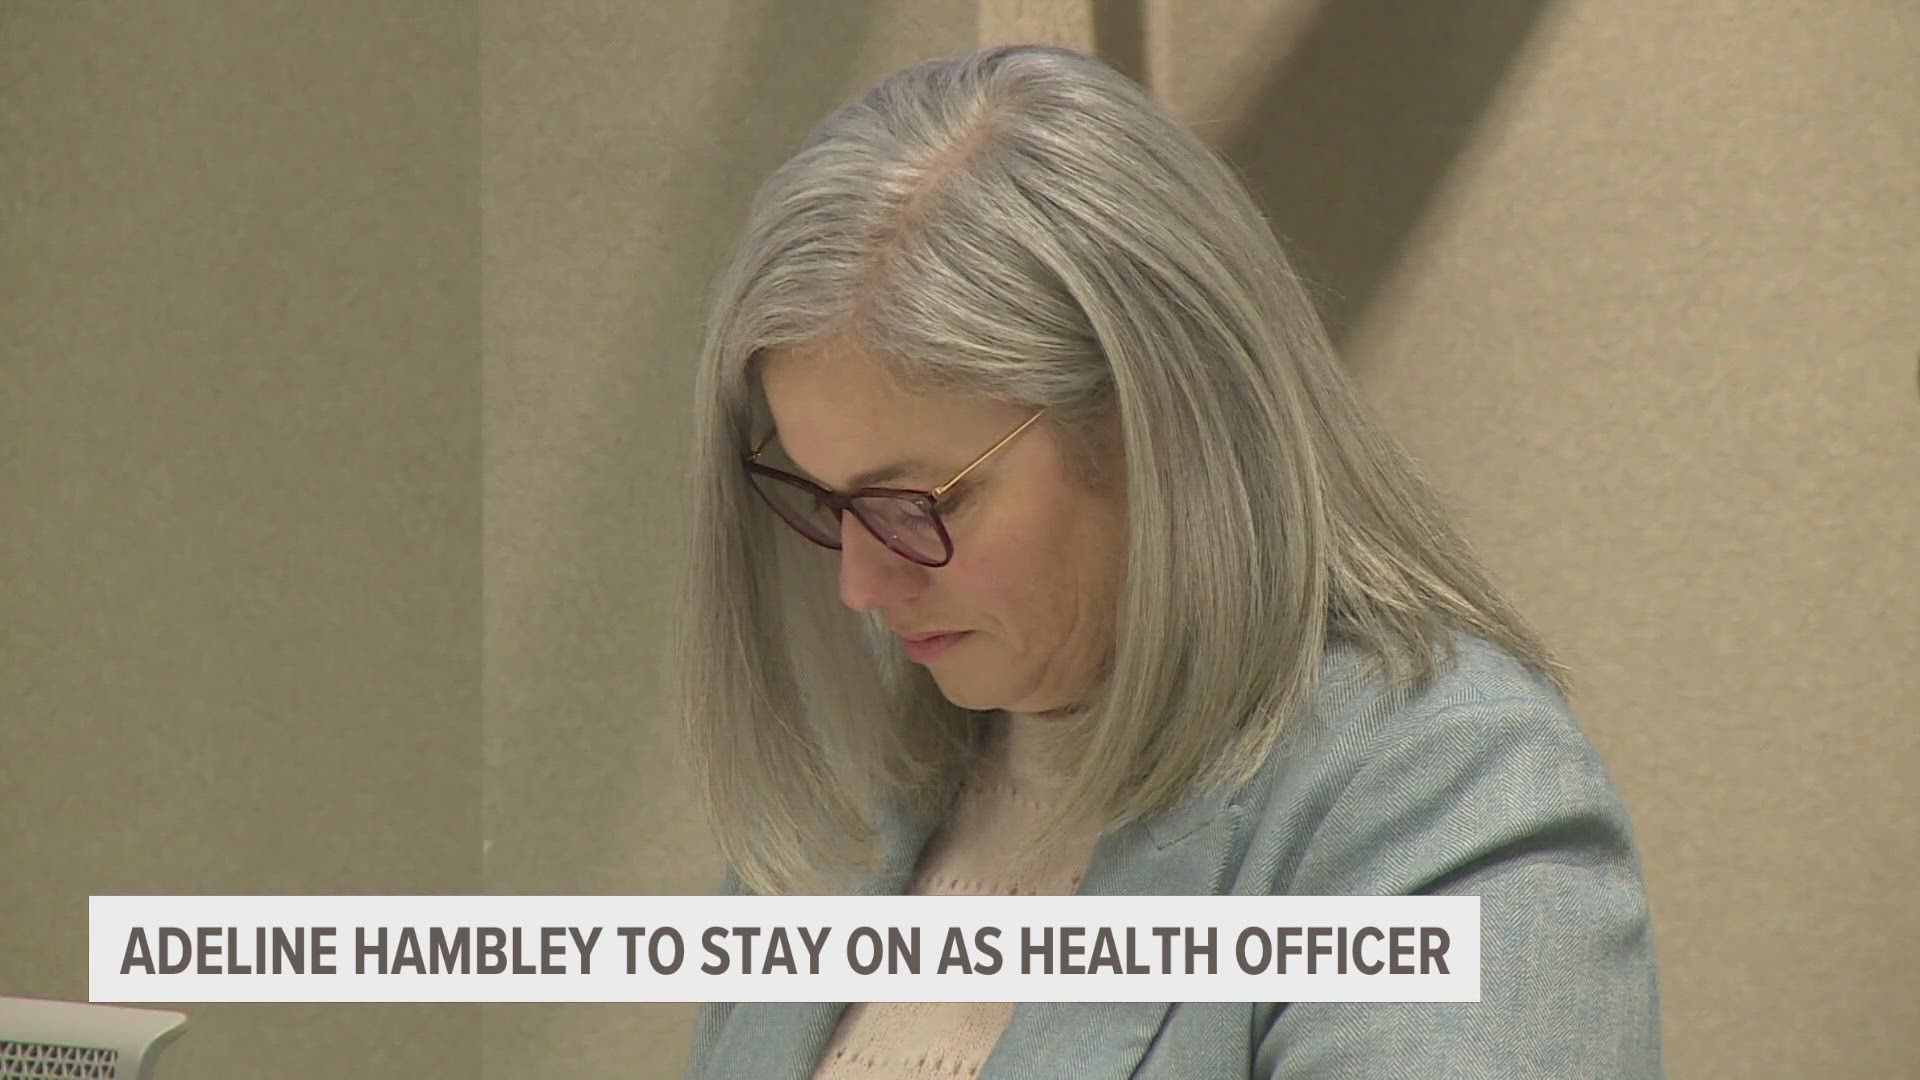 According to Hambley's attorney, the unanimous decision also included a newly-added process by which Hambley would need to be removed in the future.